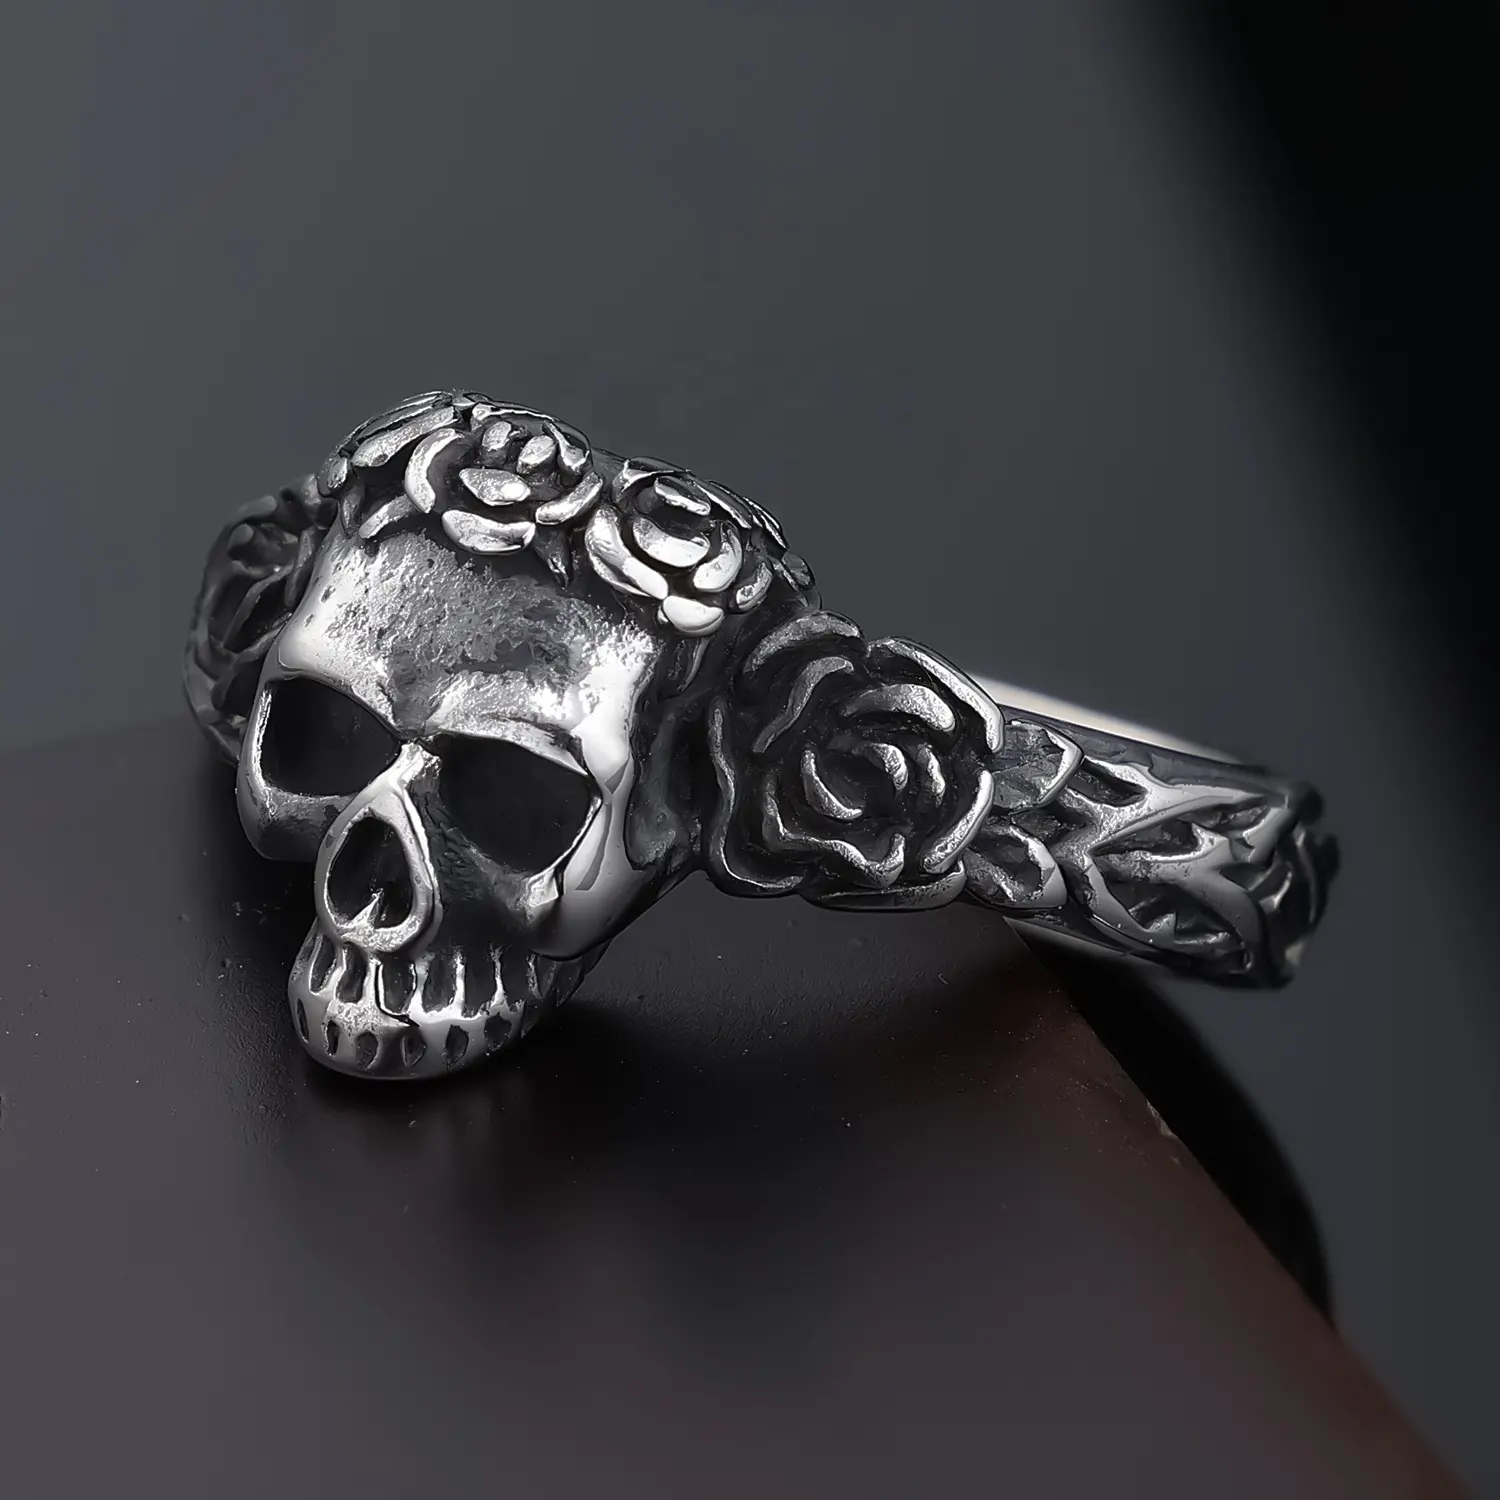 Ladies Biker Style Skull and Roses Ring Retro Stainless Steel Gothic Punk Ladies Toe Rings Size 5-14